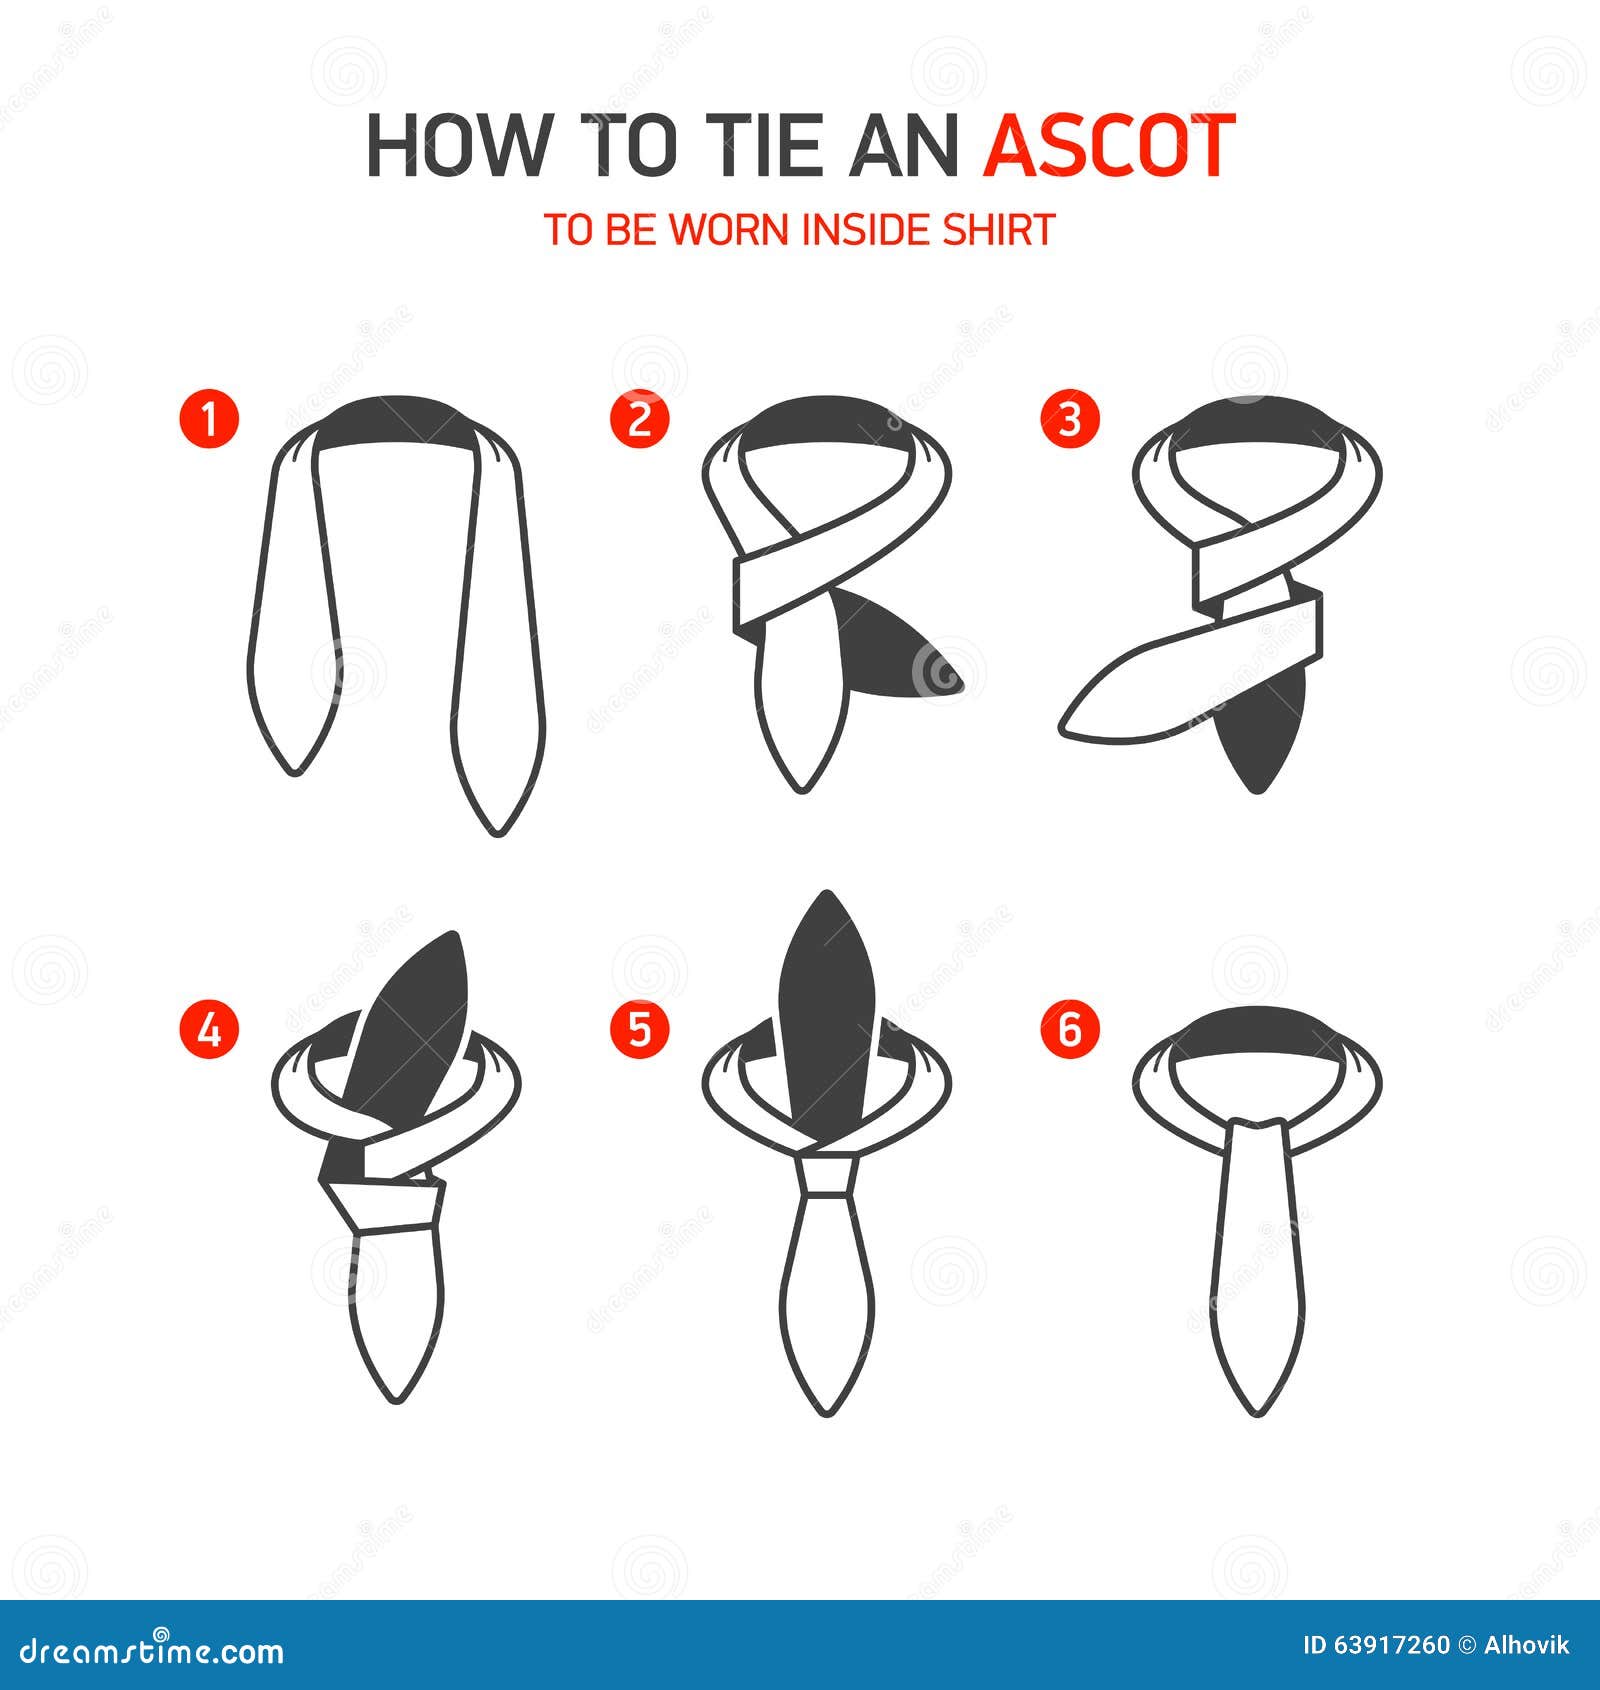 instructions on how to tie a tie